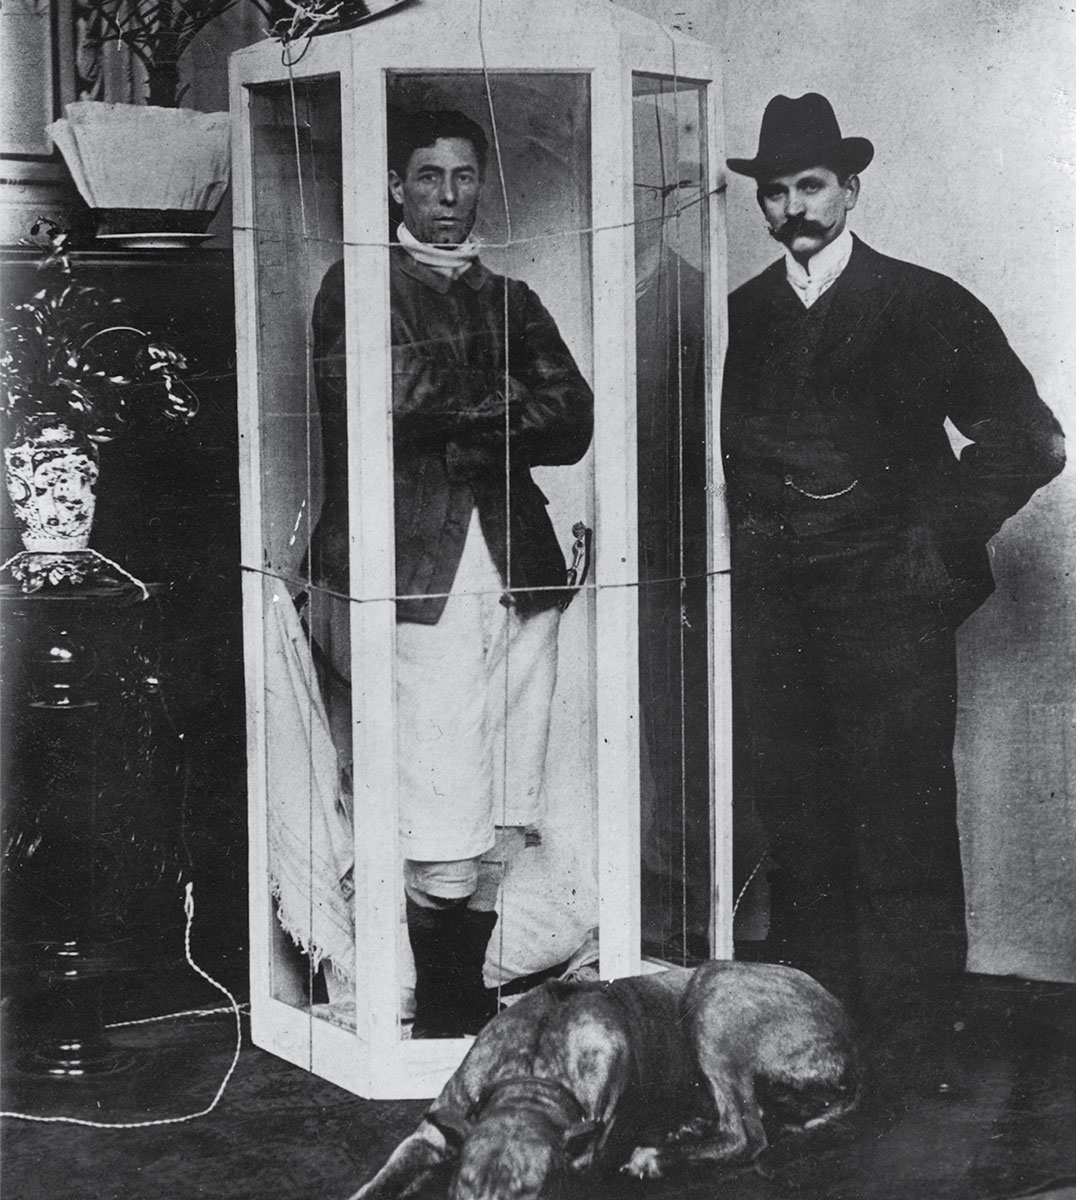 Hunger artist Papus, who was active around the turn of the twentieth century, is here pictured in his sealed glass box at the Passage-Panoptikum in Berlin. Courtesy bpk Bildagentur / Art Resource.